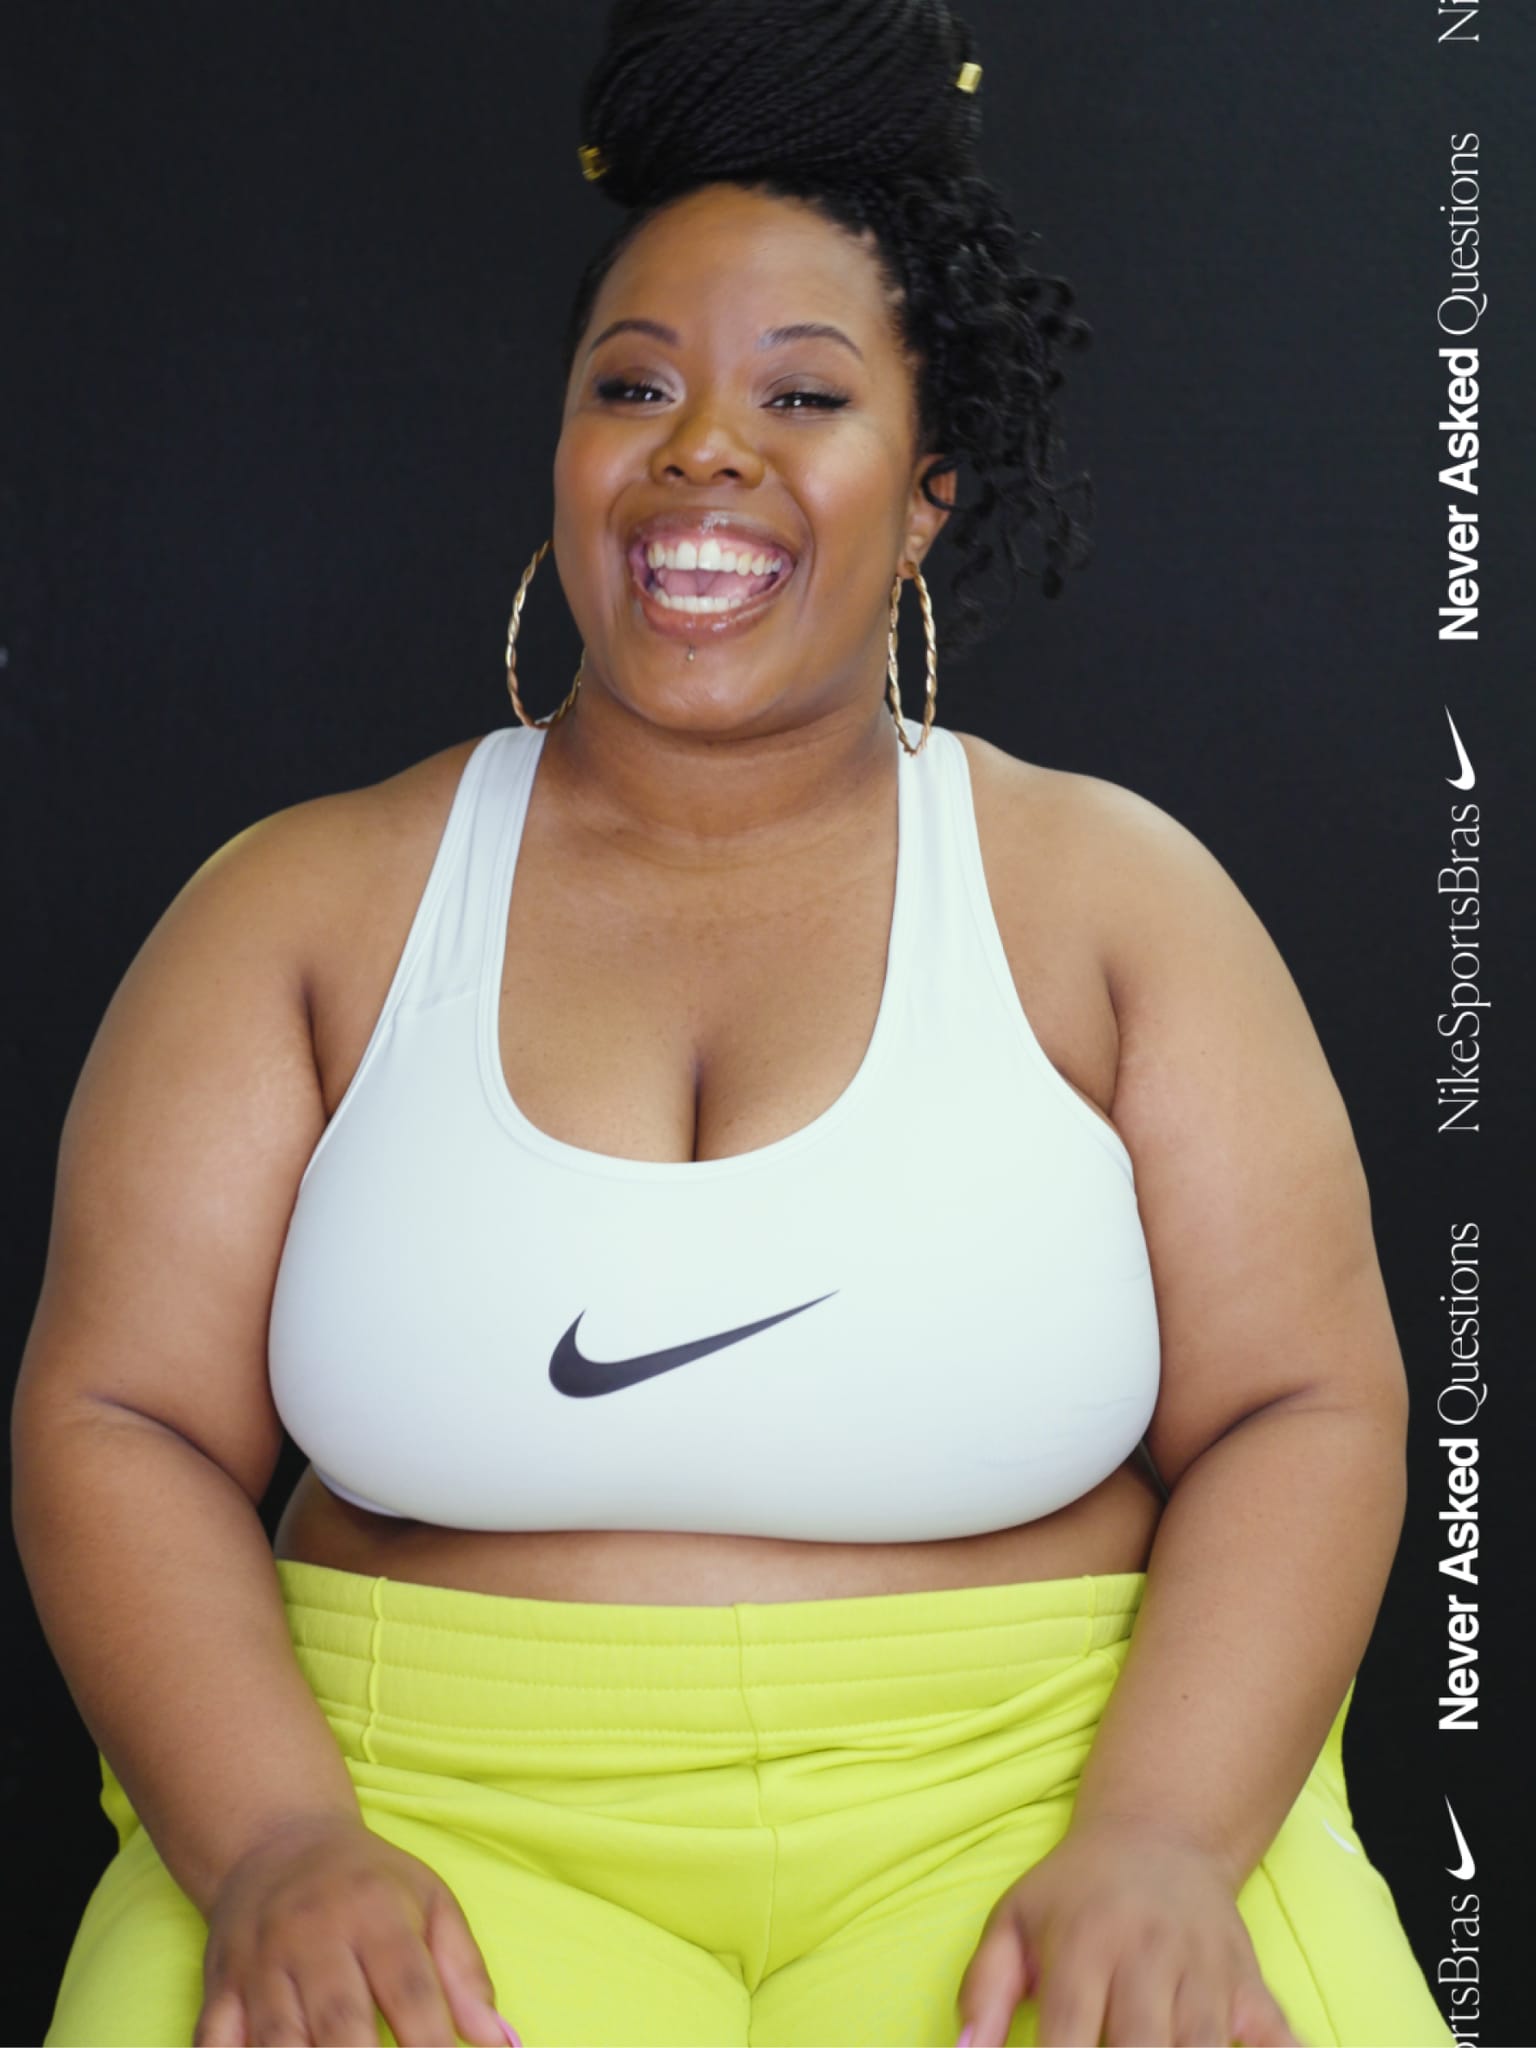 Bra By Trina: Find the Right Sports Bra for Bigger Breasts. Nike SI image